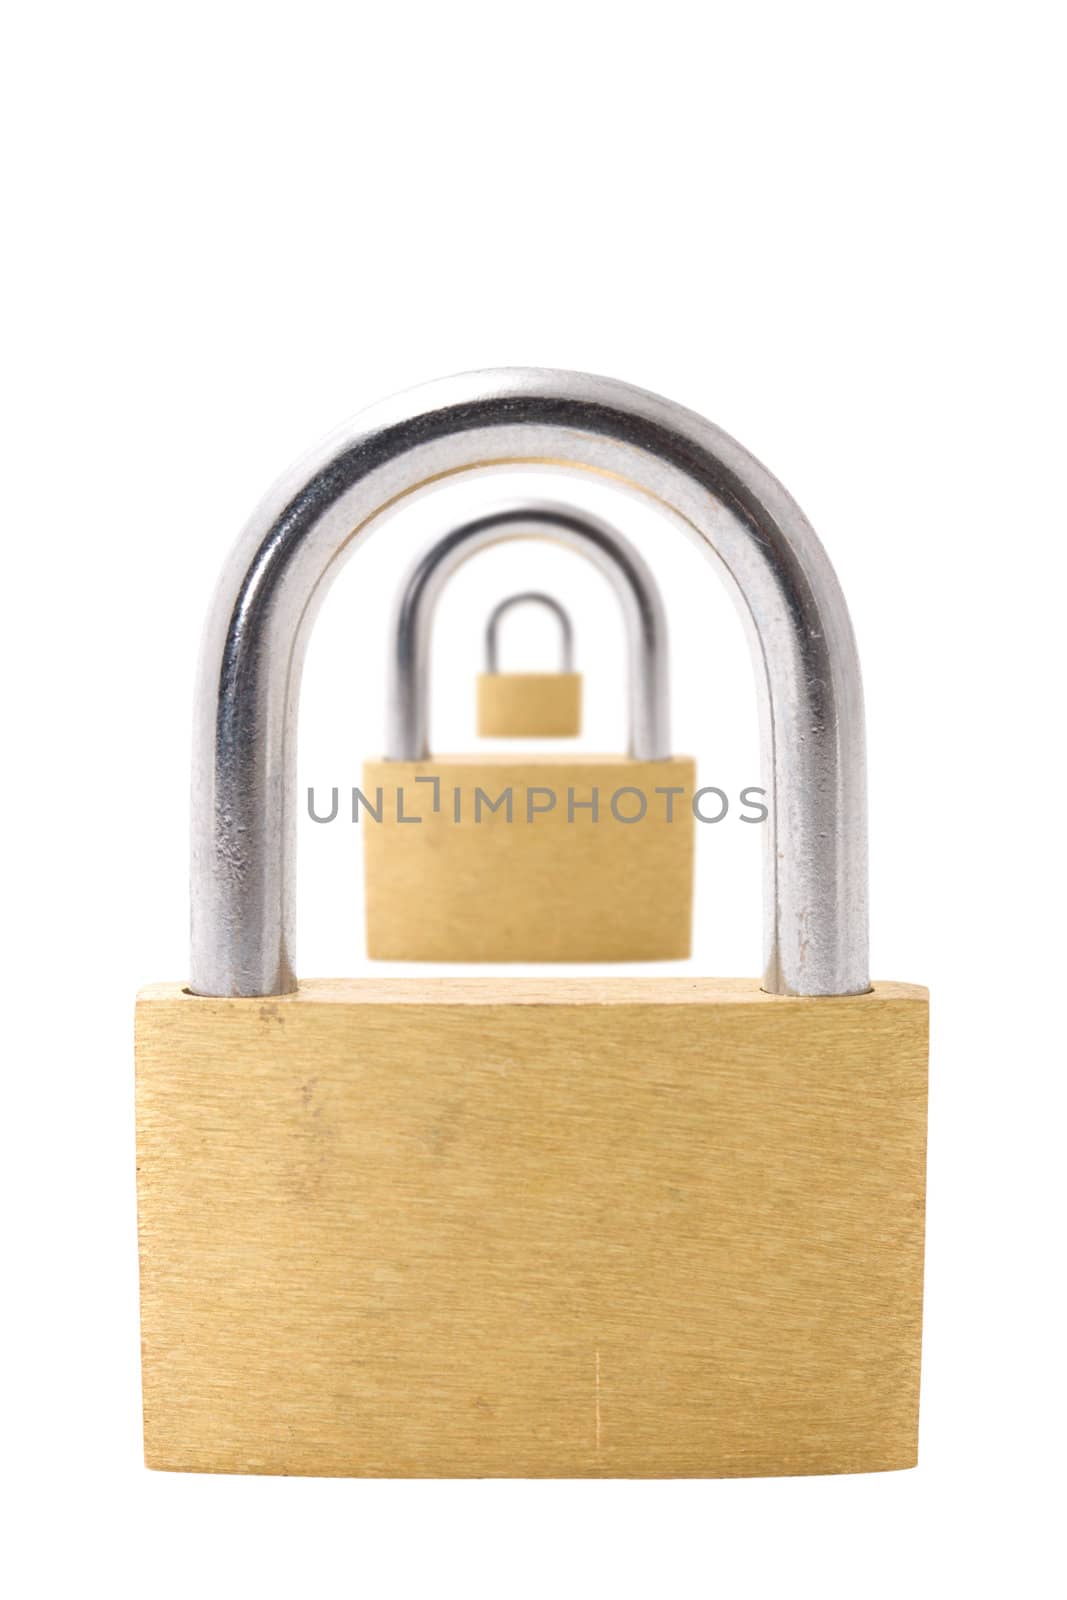 Three padlocks isolated on white background - first one in focus